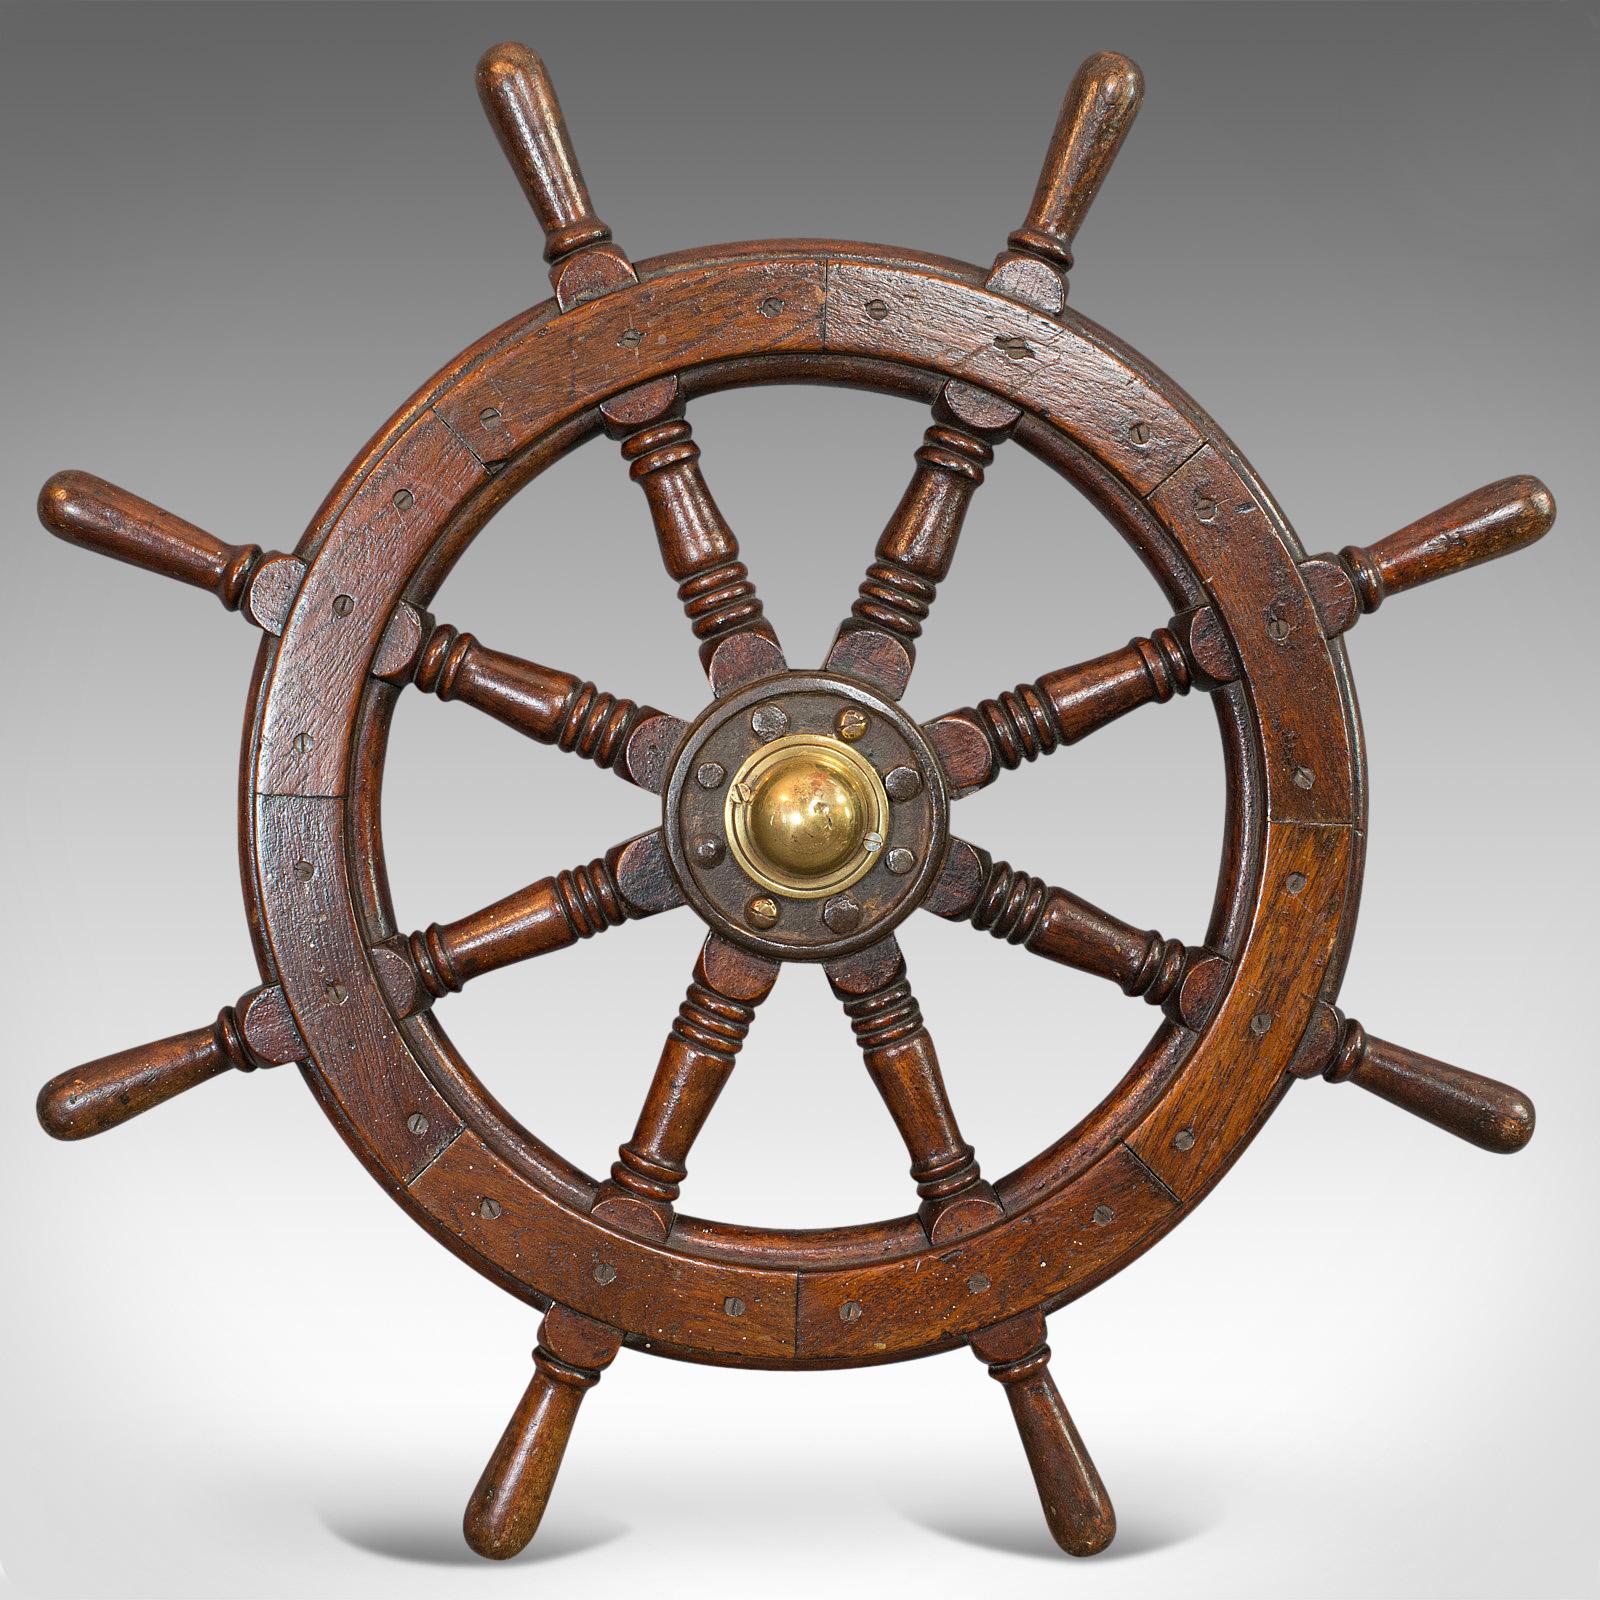 This is an antique ship's wheel. An English, oak and brass maritime decorative helm, dating to the late Victorian period, circa 1900

High maritime appeal
Displays a desirable aged patina
Select oak shows fine grain interest
Rich russet hues